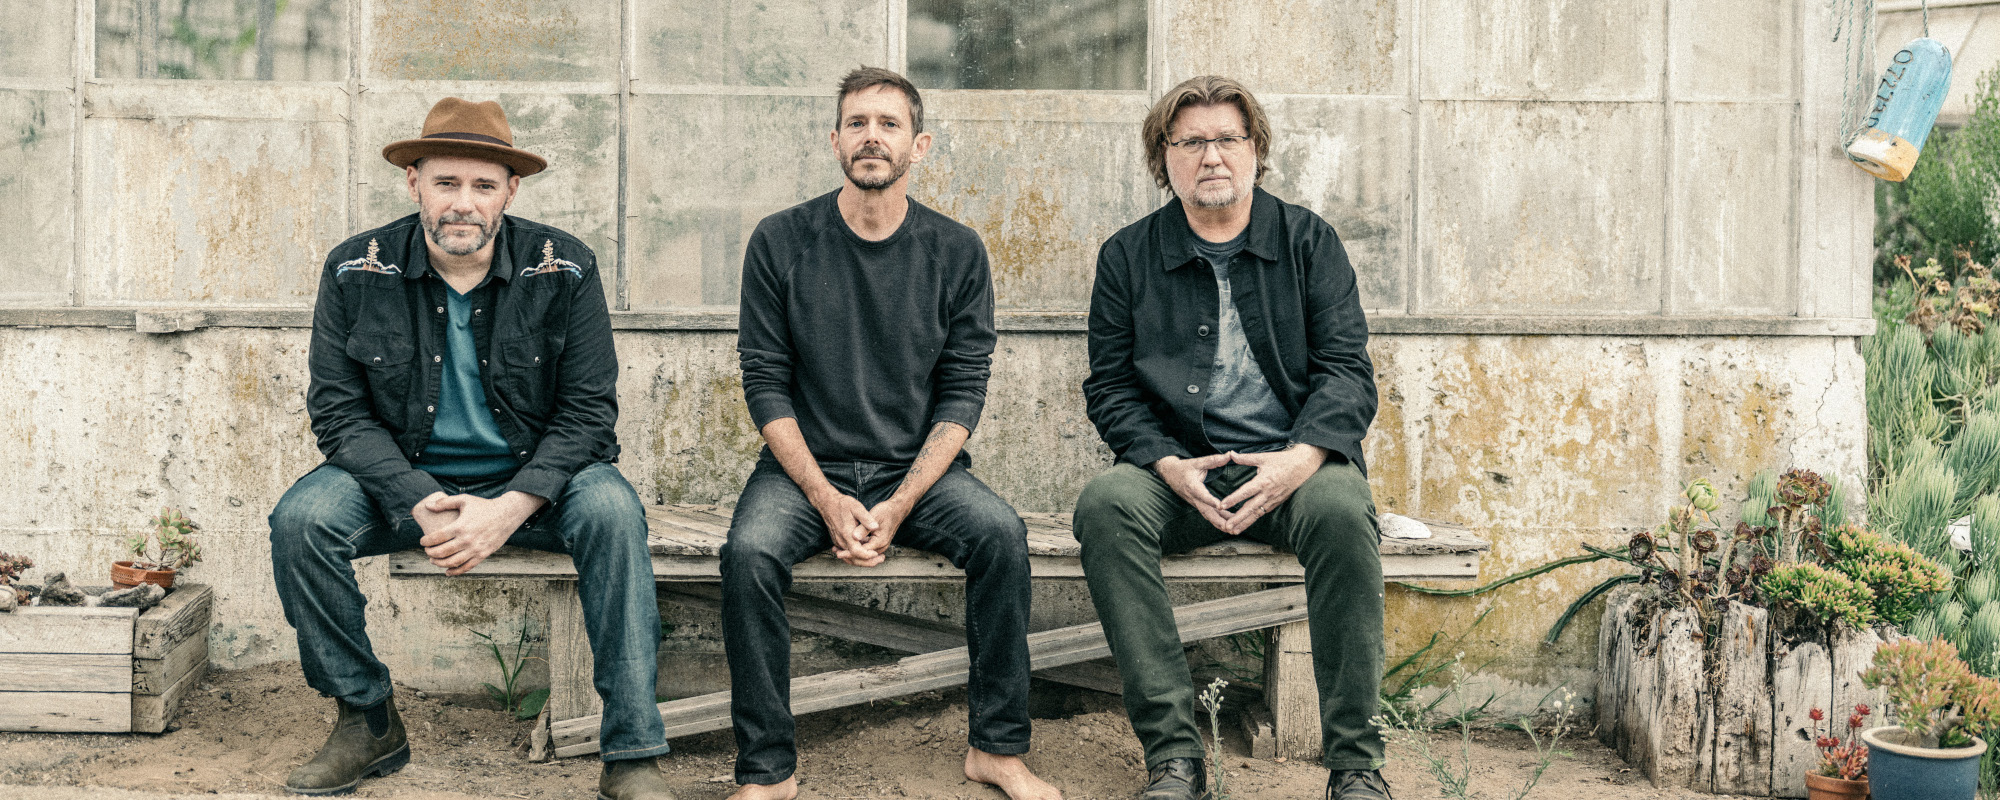 Toad The Wet Sprocket Announces New Tour and Album